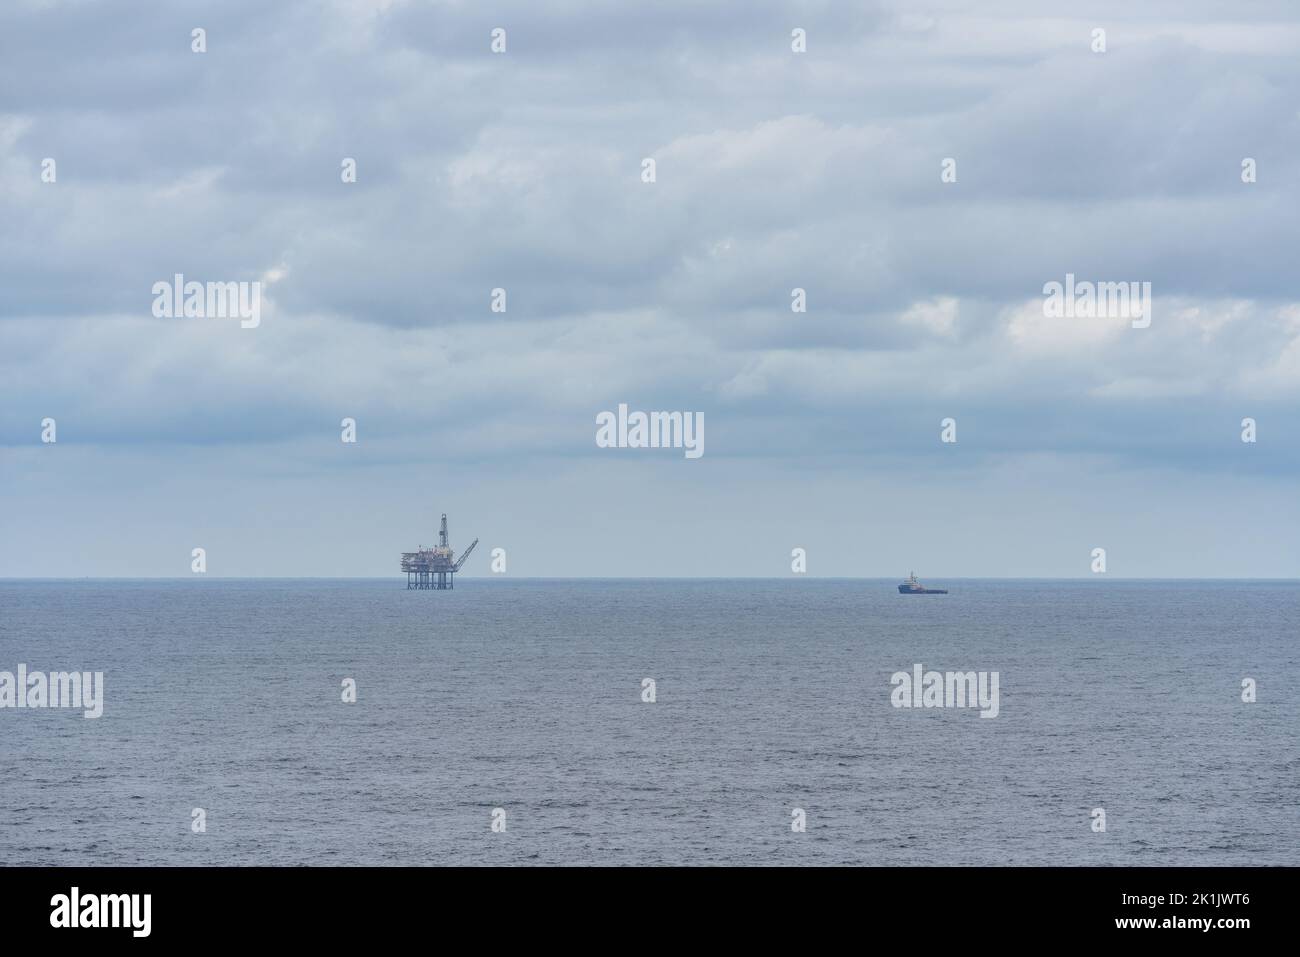 Oil or gas platform and a ship in the sea Stock Photo